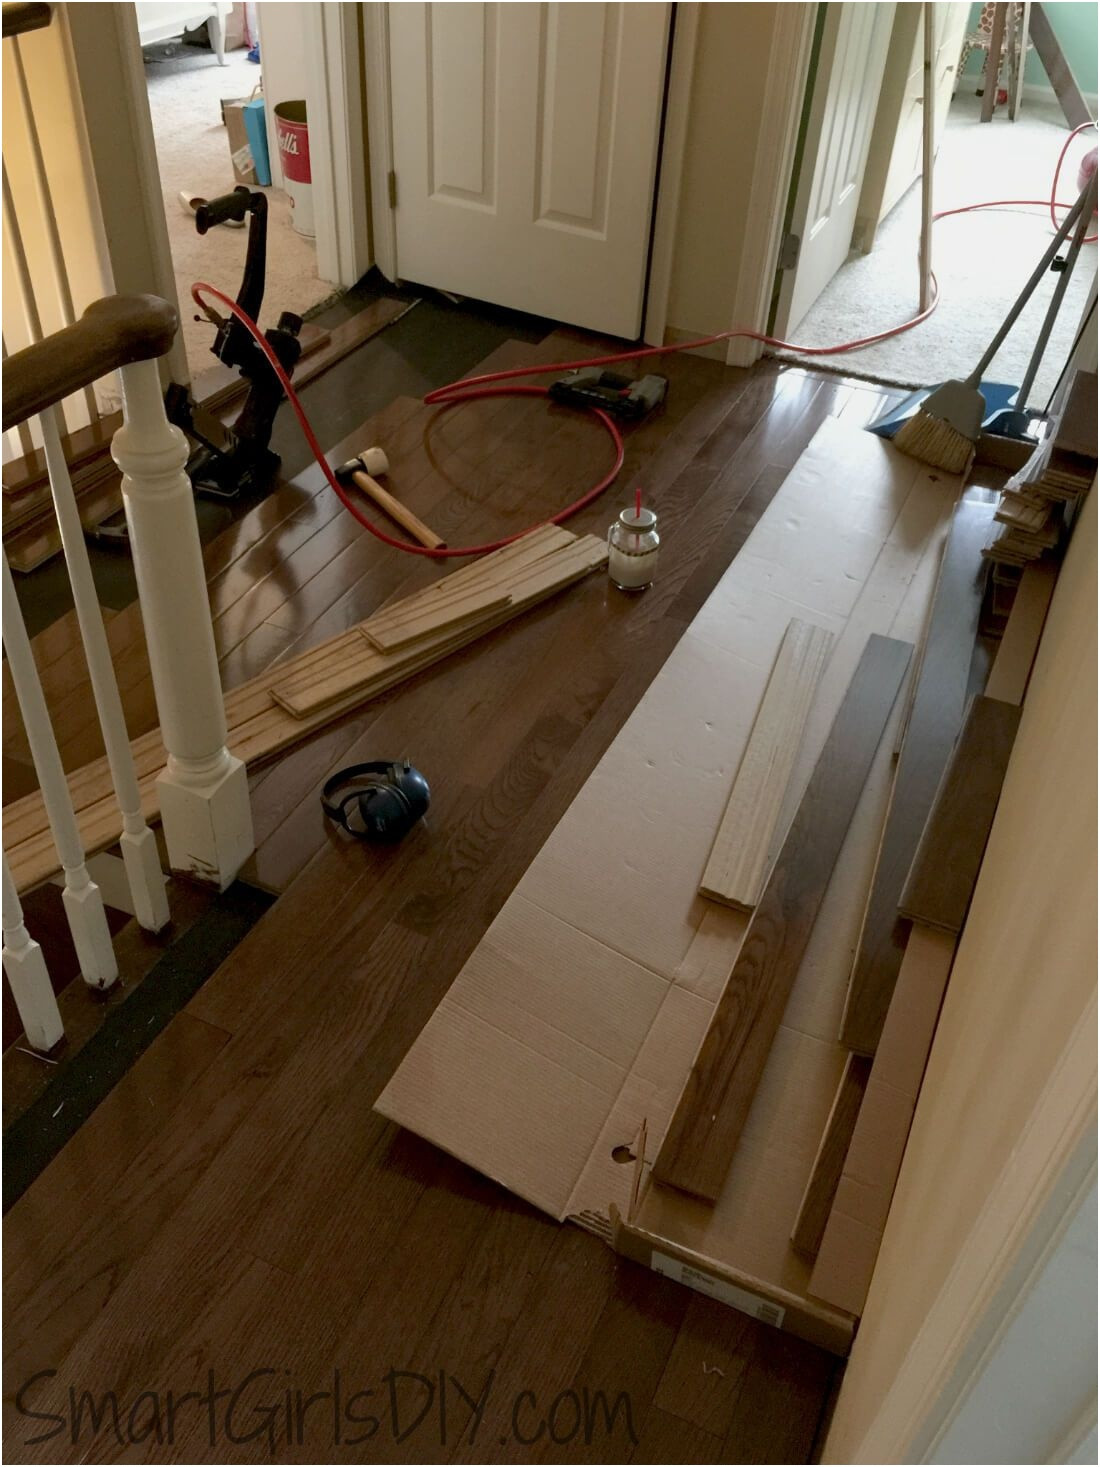 10 attractive How to Install Hardwood Floors Lowes 2024 free download how to install hardwood floors lowes of tongue and groove flooring lowes flooring design in tongue and groove flooring lowes images upstairs hallway 1 installing hardwood floors of tongue an